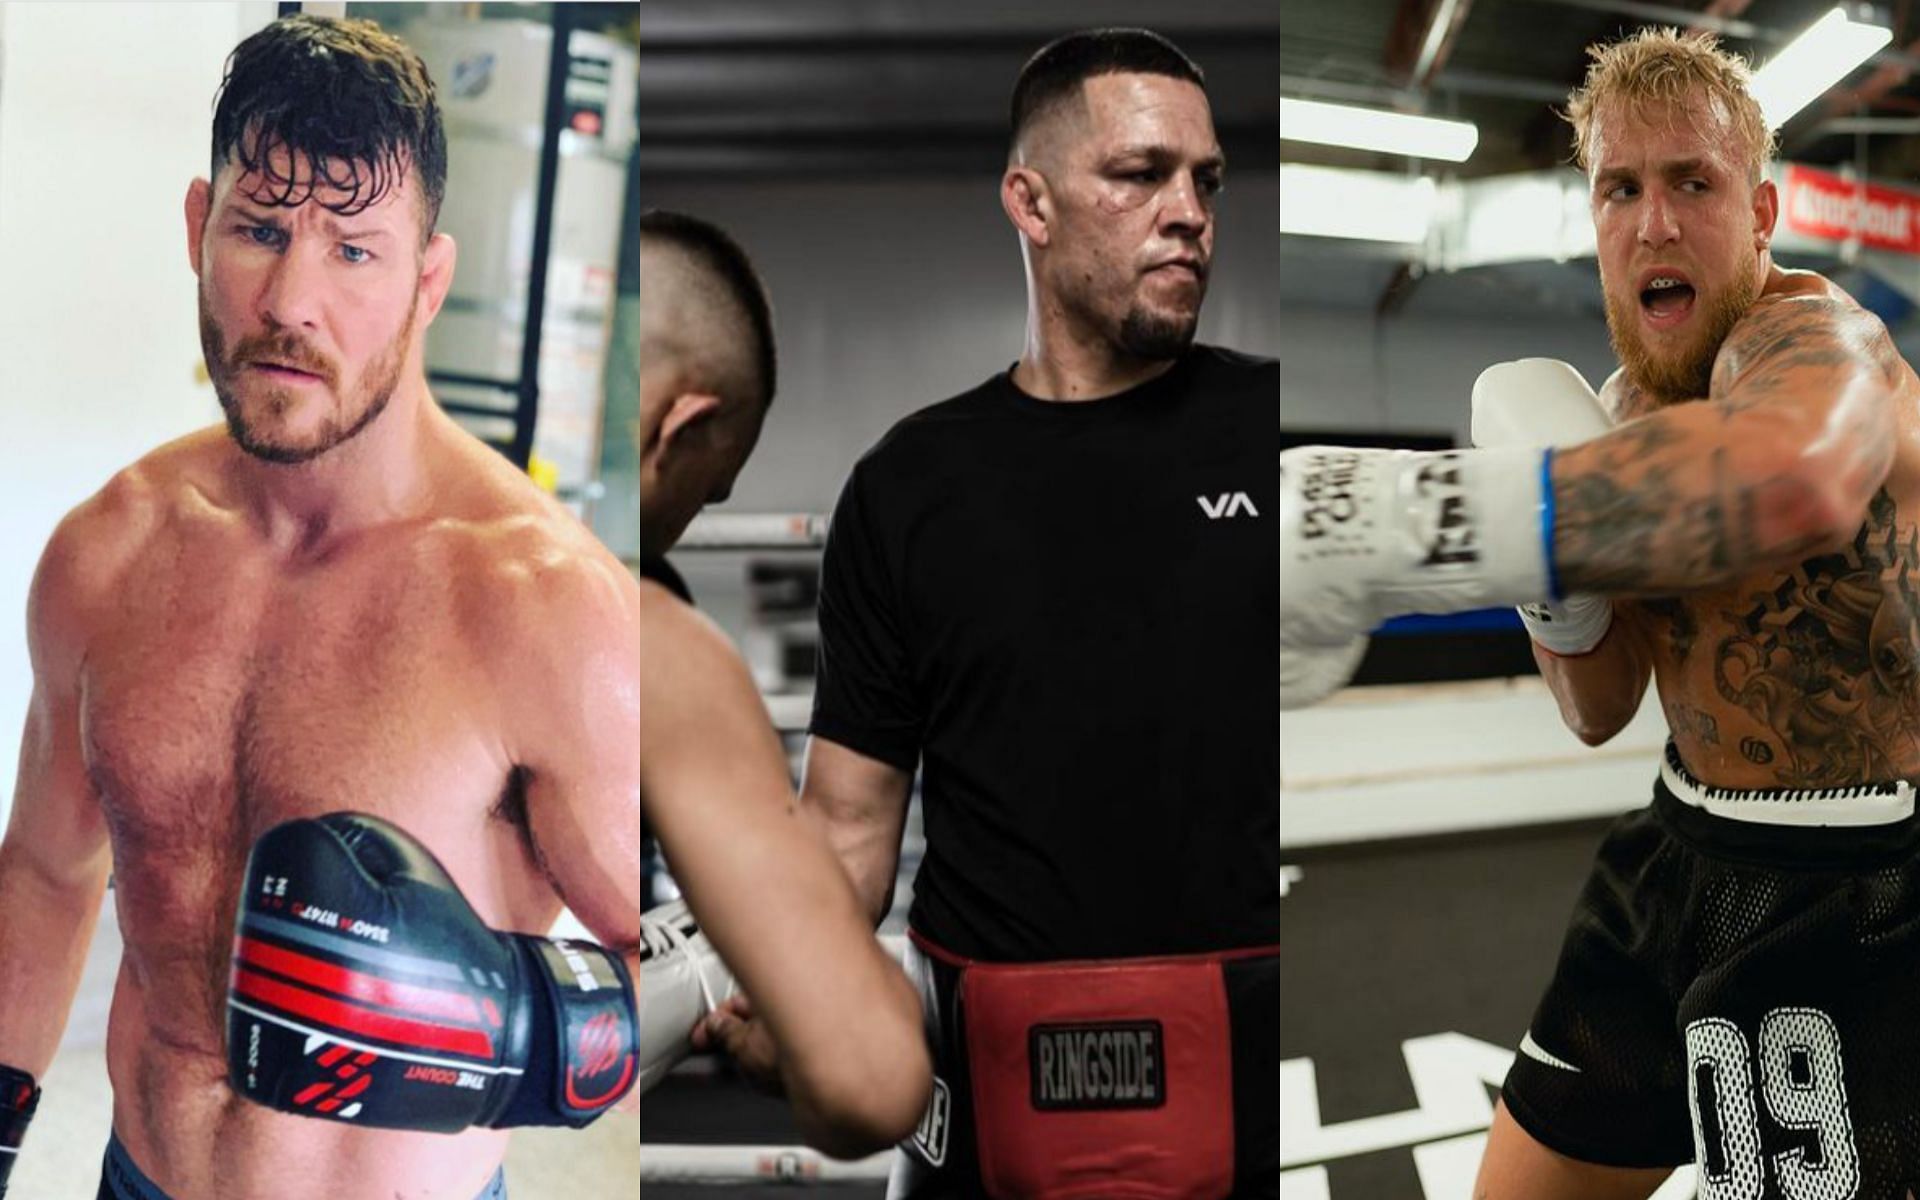 Michael Bisping (L), Nate Diaz (M), and Jake Paul (R) [Images Courtesy: @mikebisping, @natediaz209, and @jakepaul on Instagram]